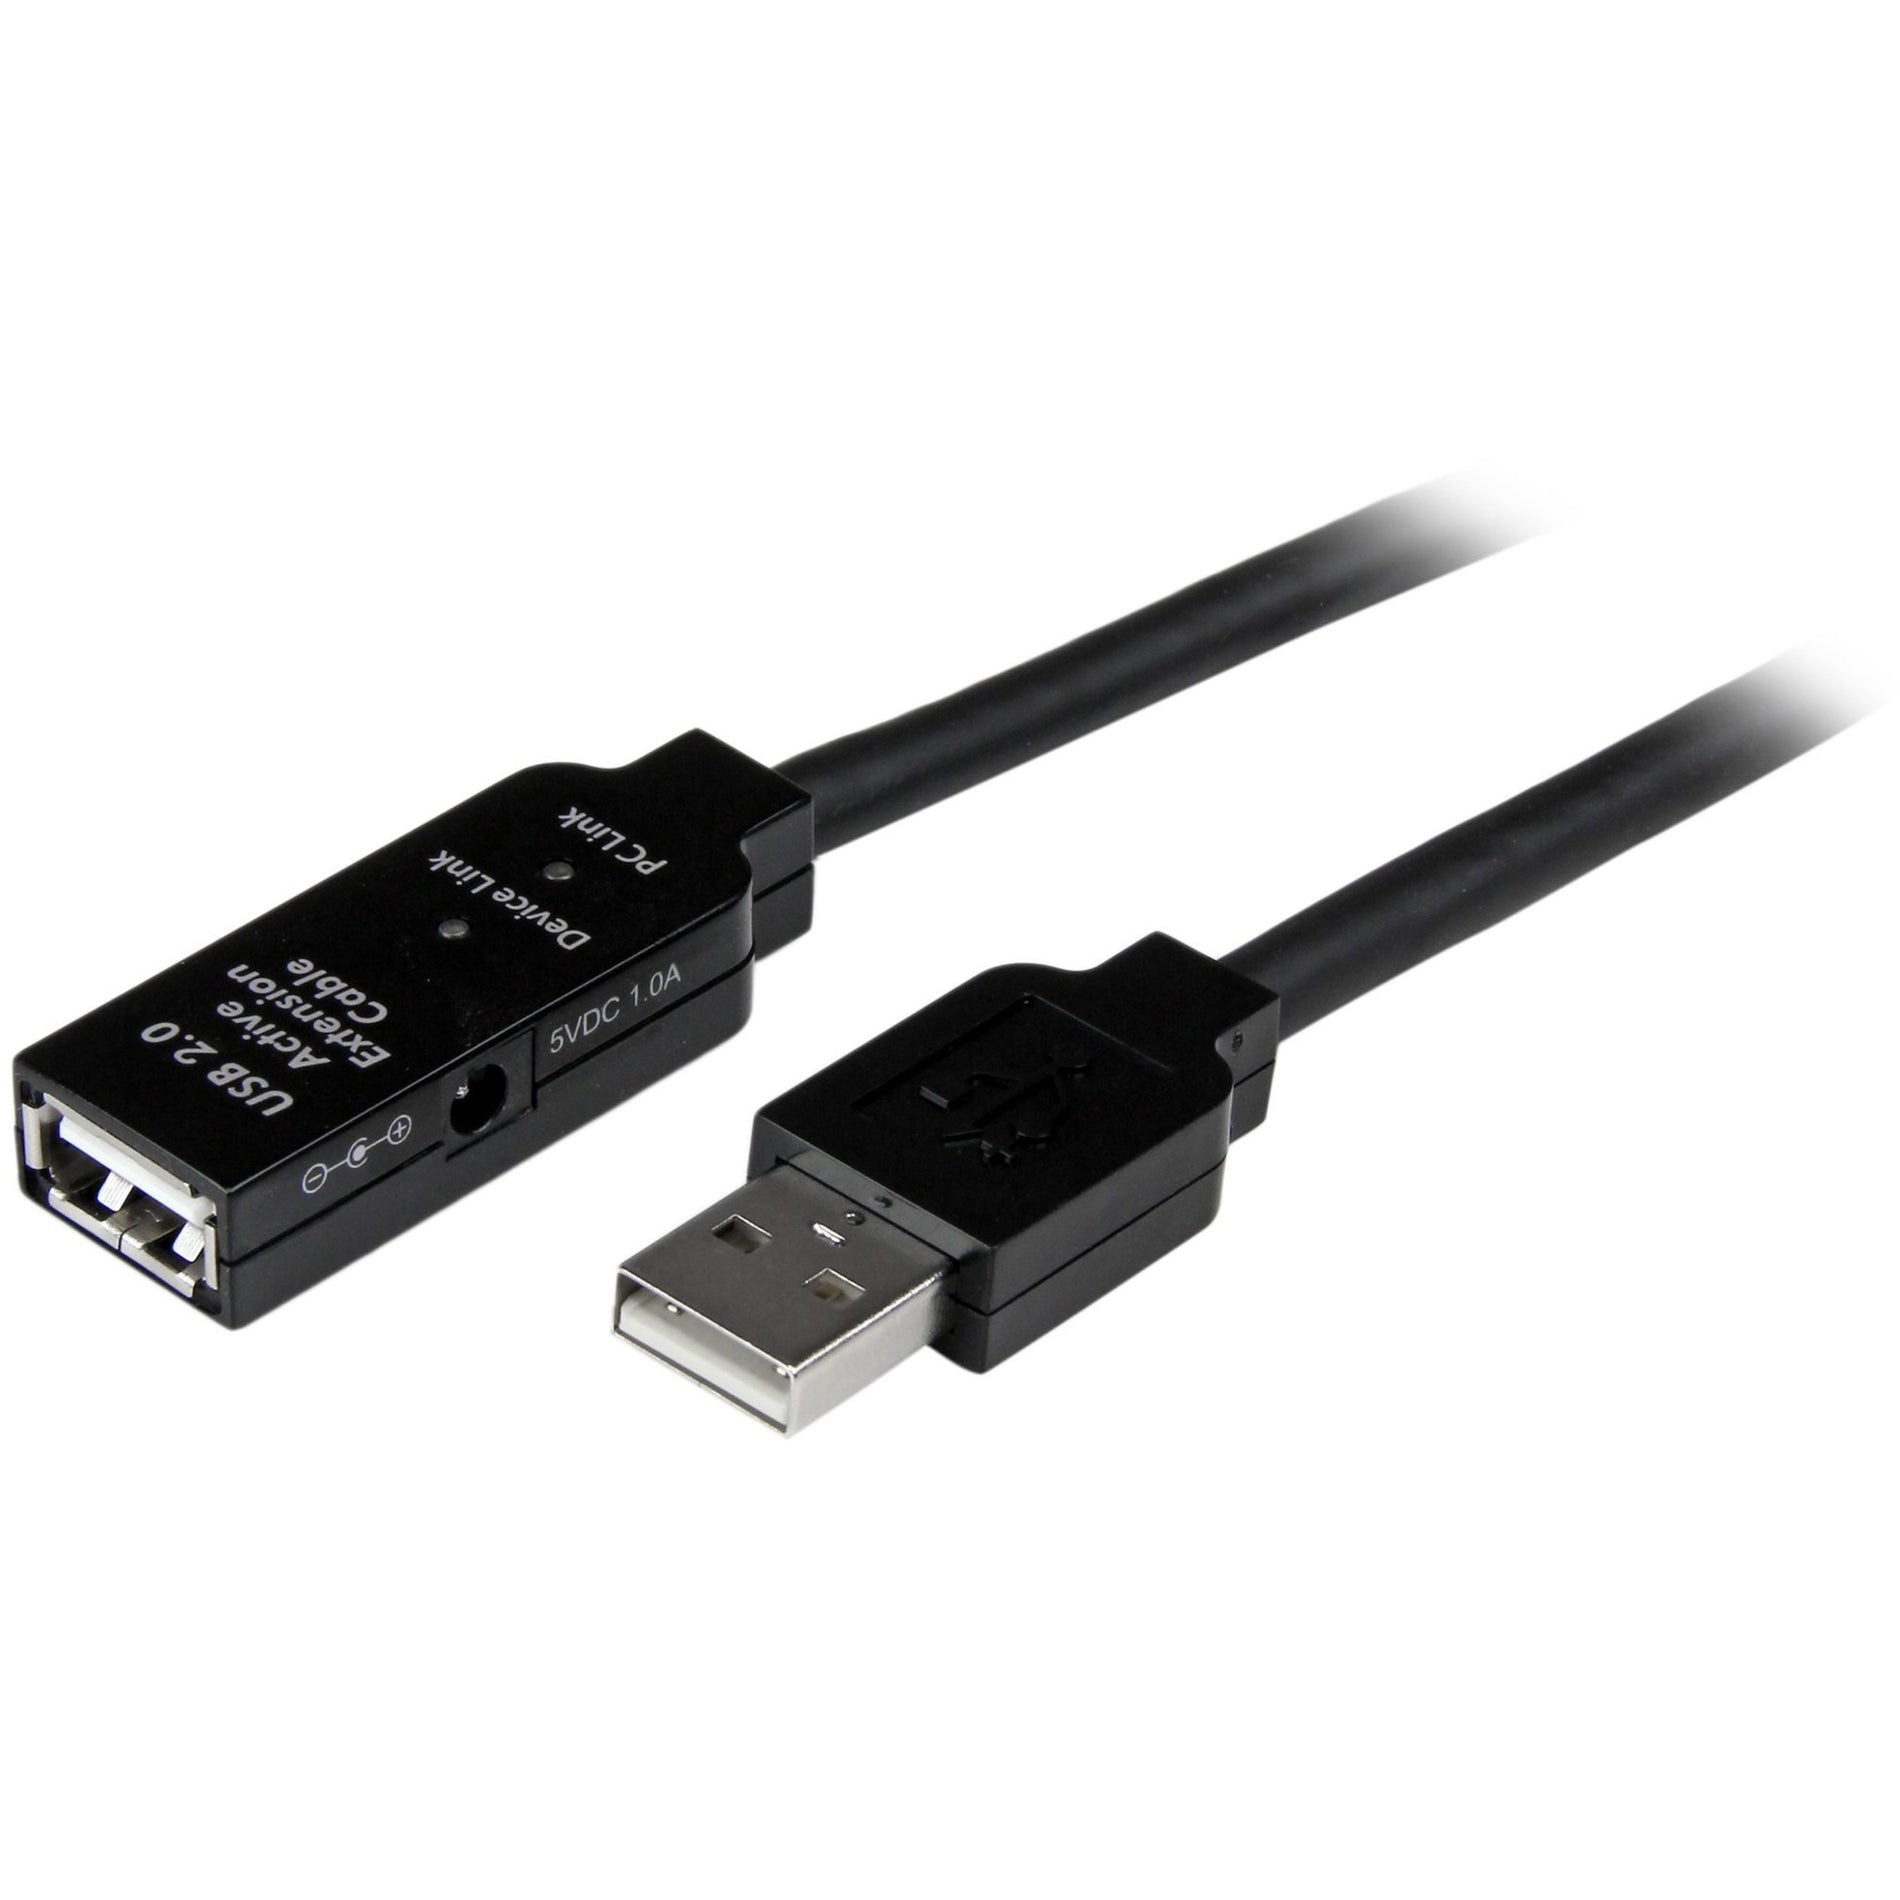 StarTech.com USB2AAEXT5M 5m USB 2.0 Active Extension Cable - M/F, Extend Your USB Connection up to 16.40 ft